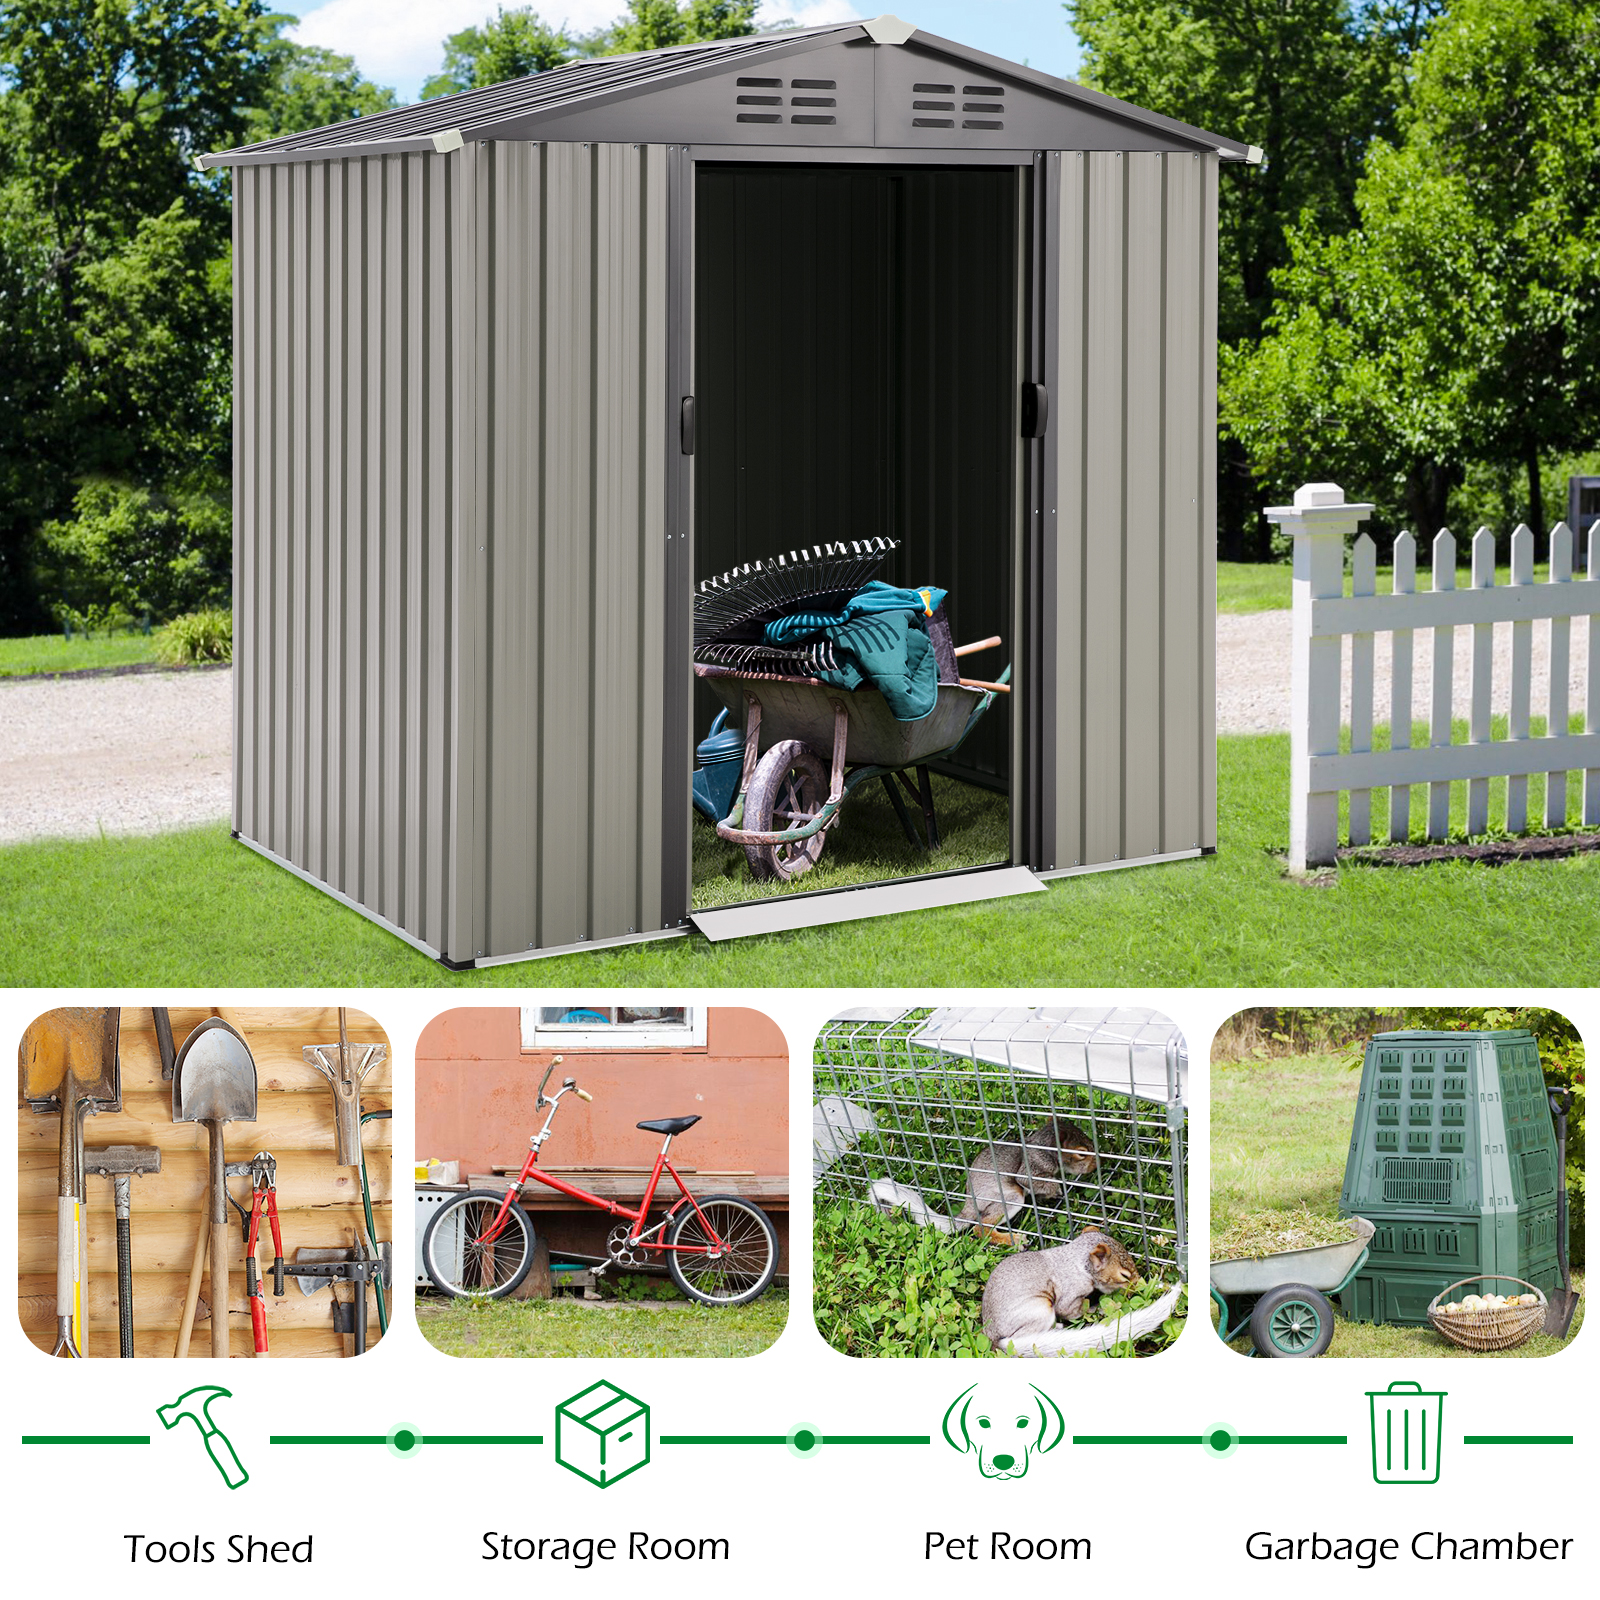 AECOJOY 6 x 4 ft. Outdoor Metal Storage Shed with Sliding Door - image 5 of 10